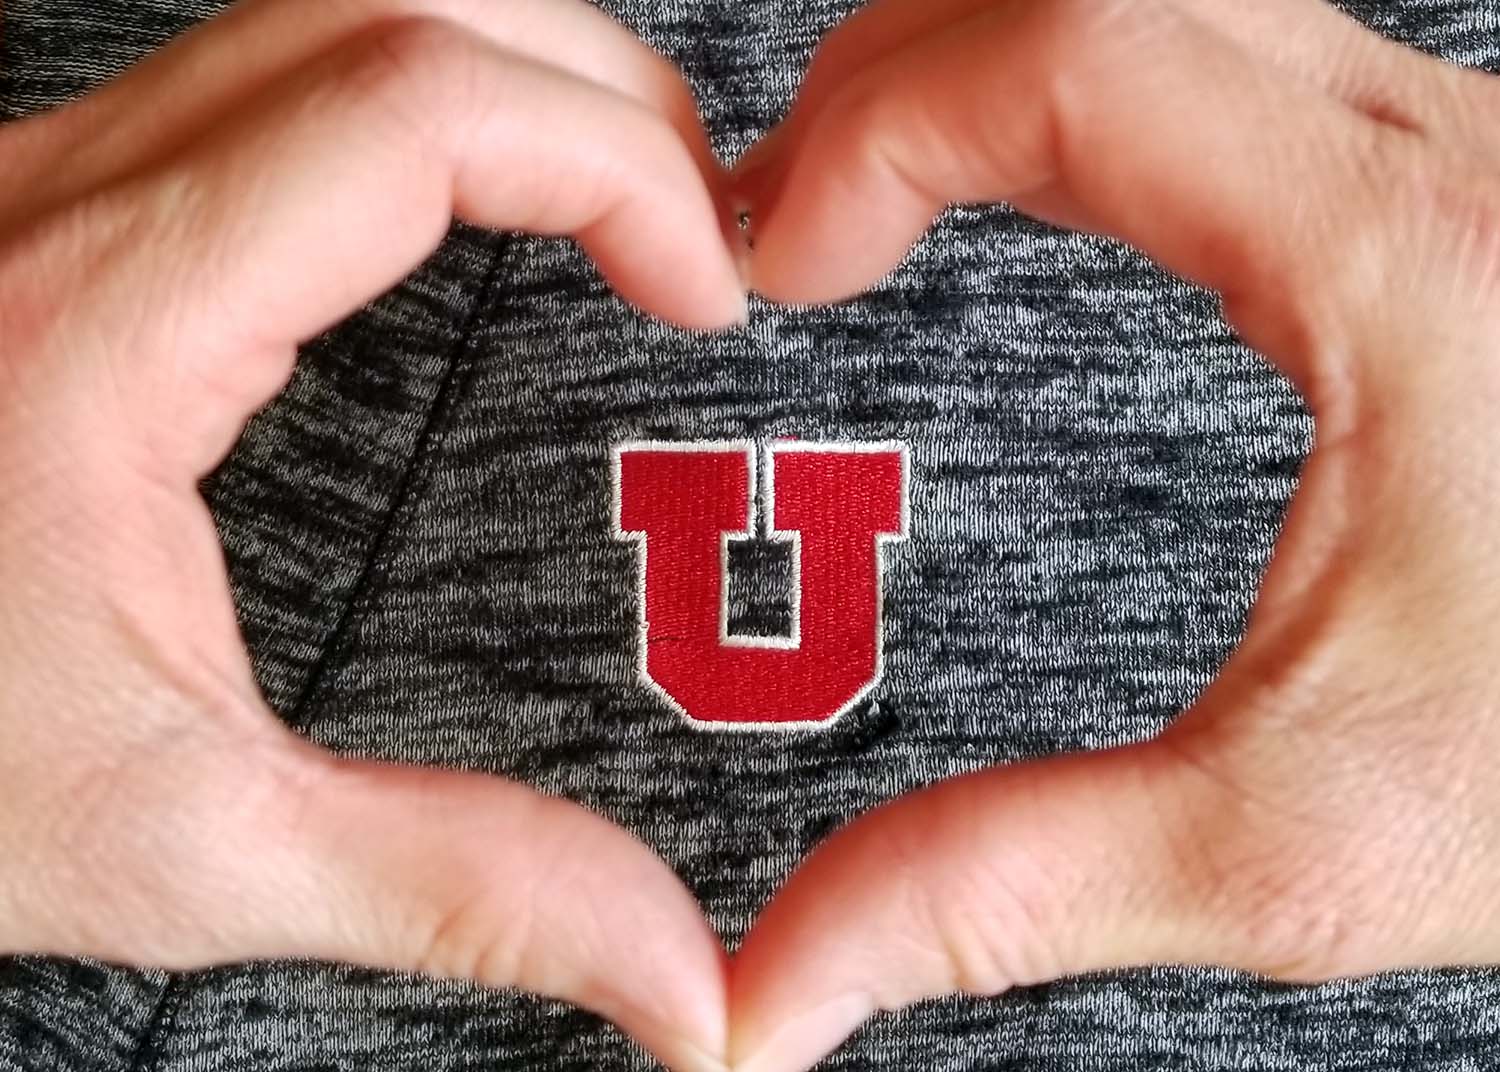 Two hands forming a heart around the block U logo